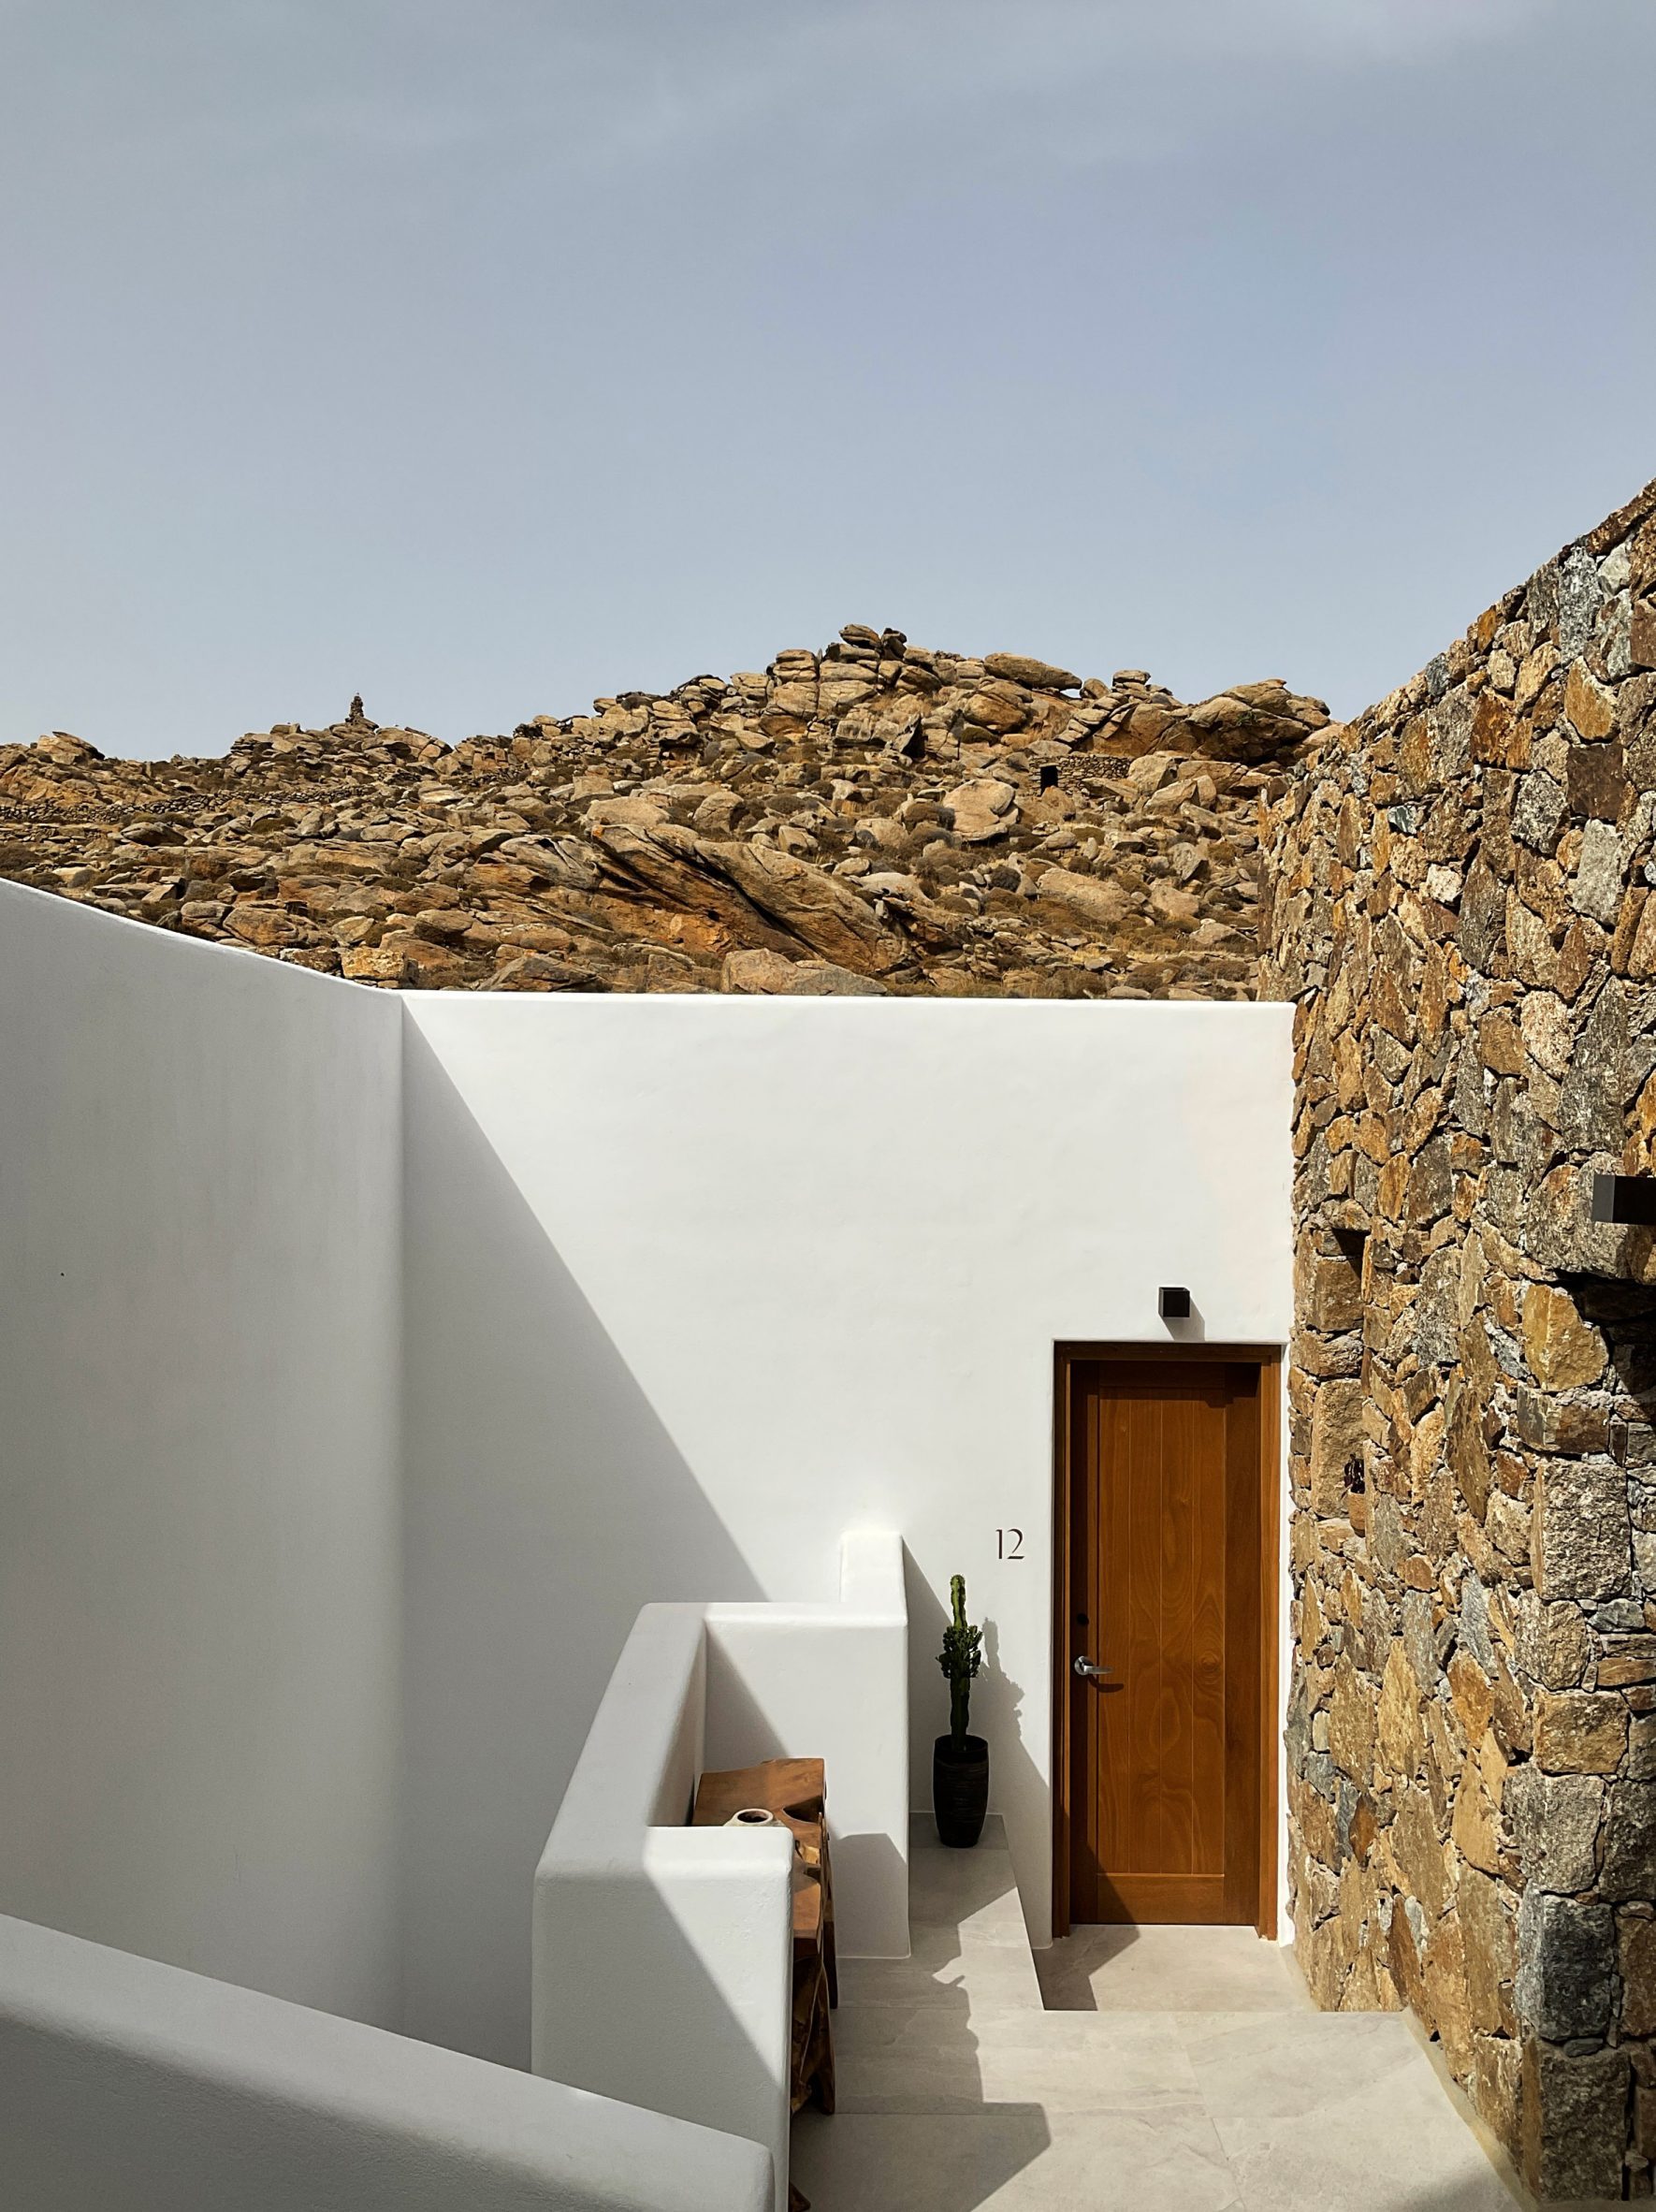 Entrance to Mykonos Wellness Resort with one whitewashed wall and one stone one that blends into the hill